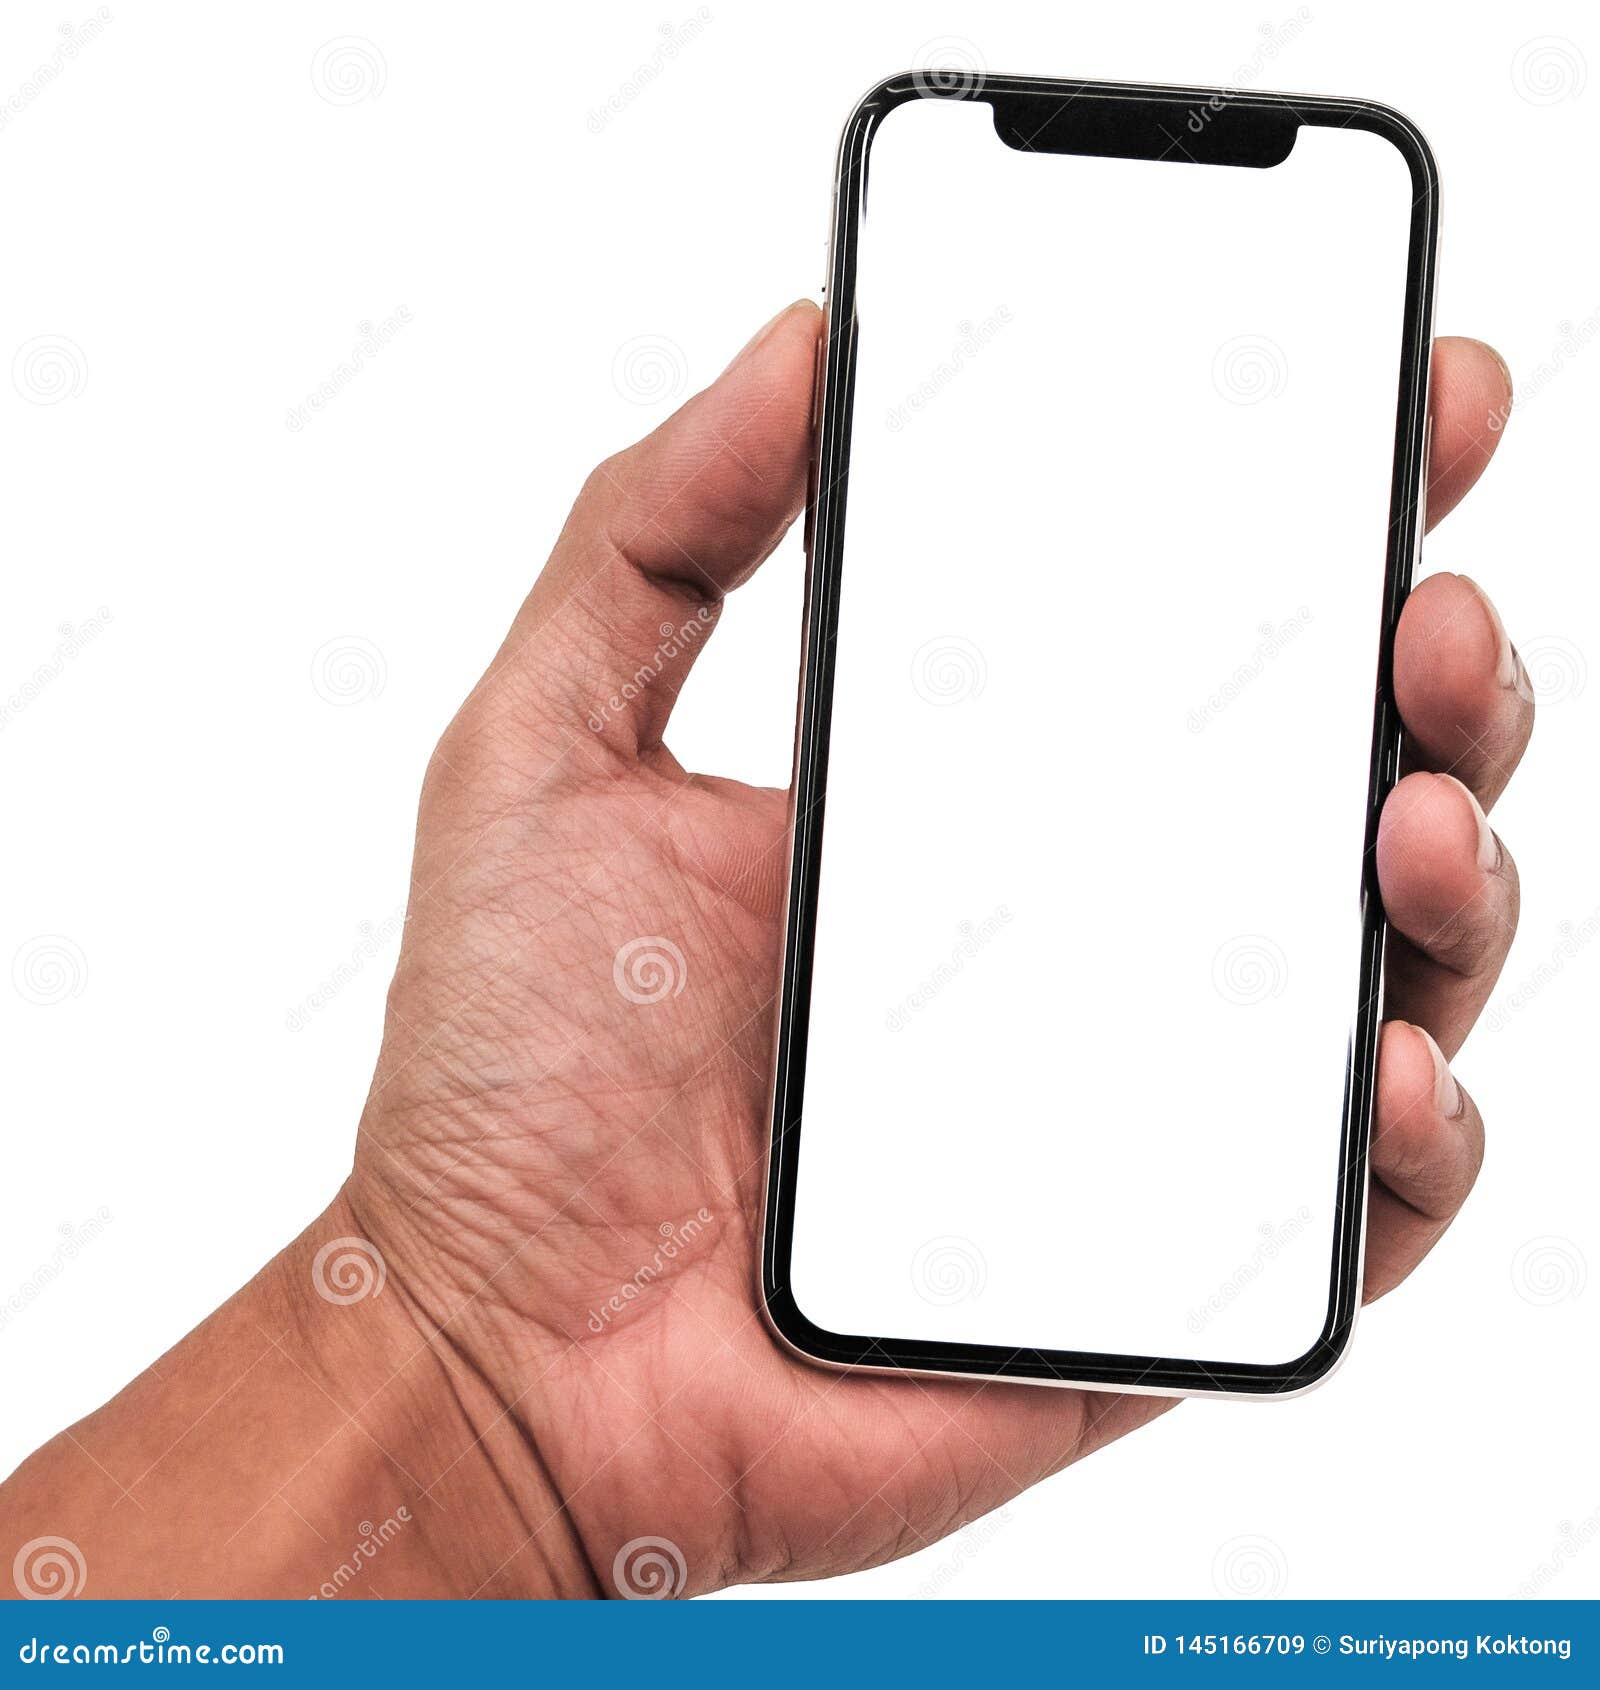 hand holding, new version of black slim smartphone similar to iphone x